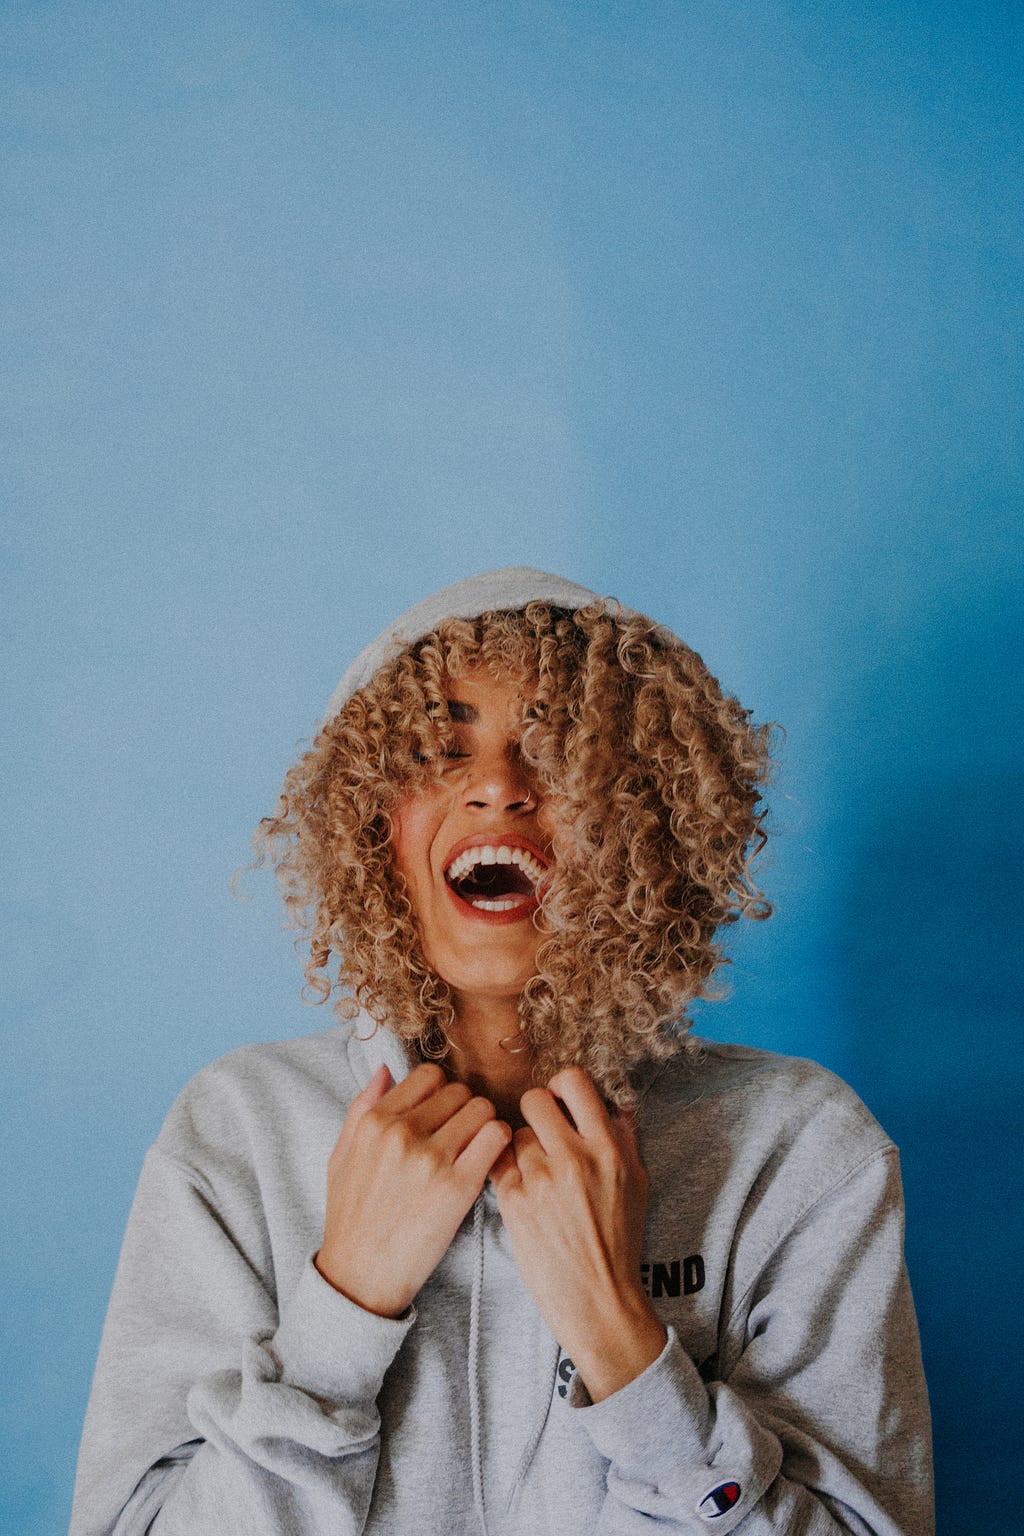 A female of color with curly hair and gray hoody is laughing with her eyes shut in front of a variety of different blues background.